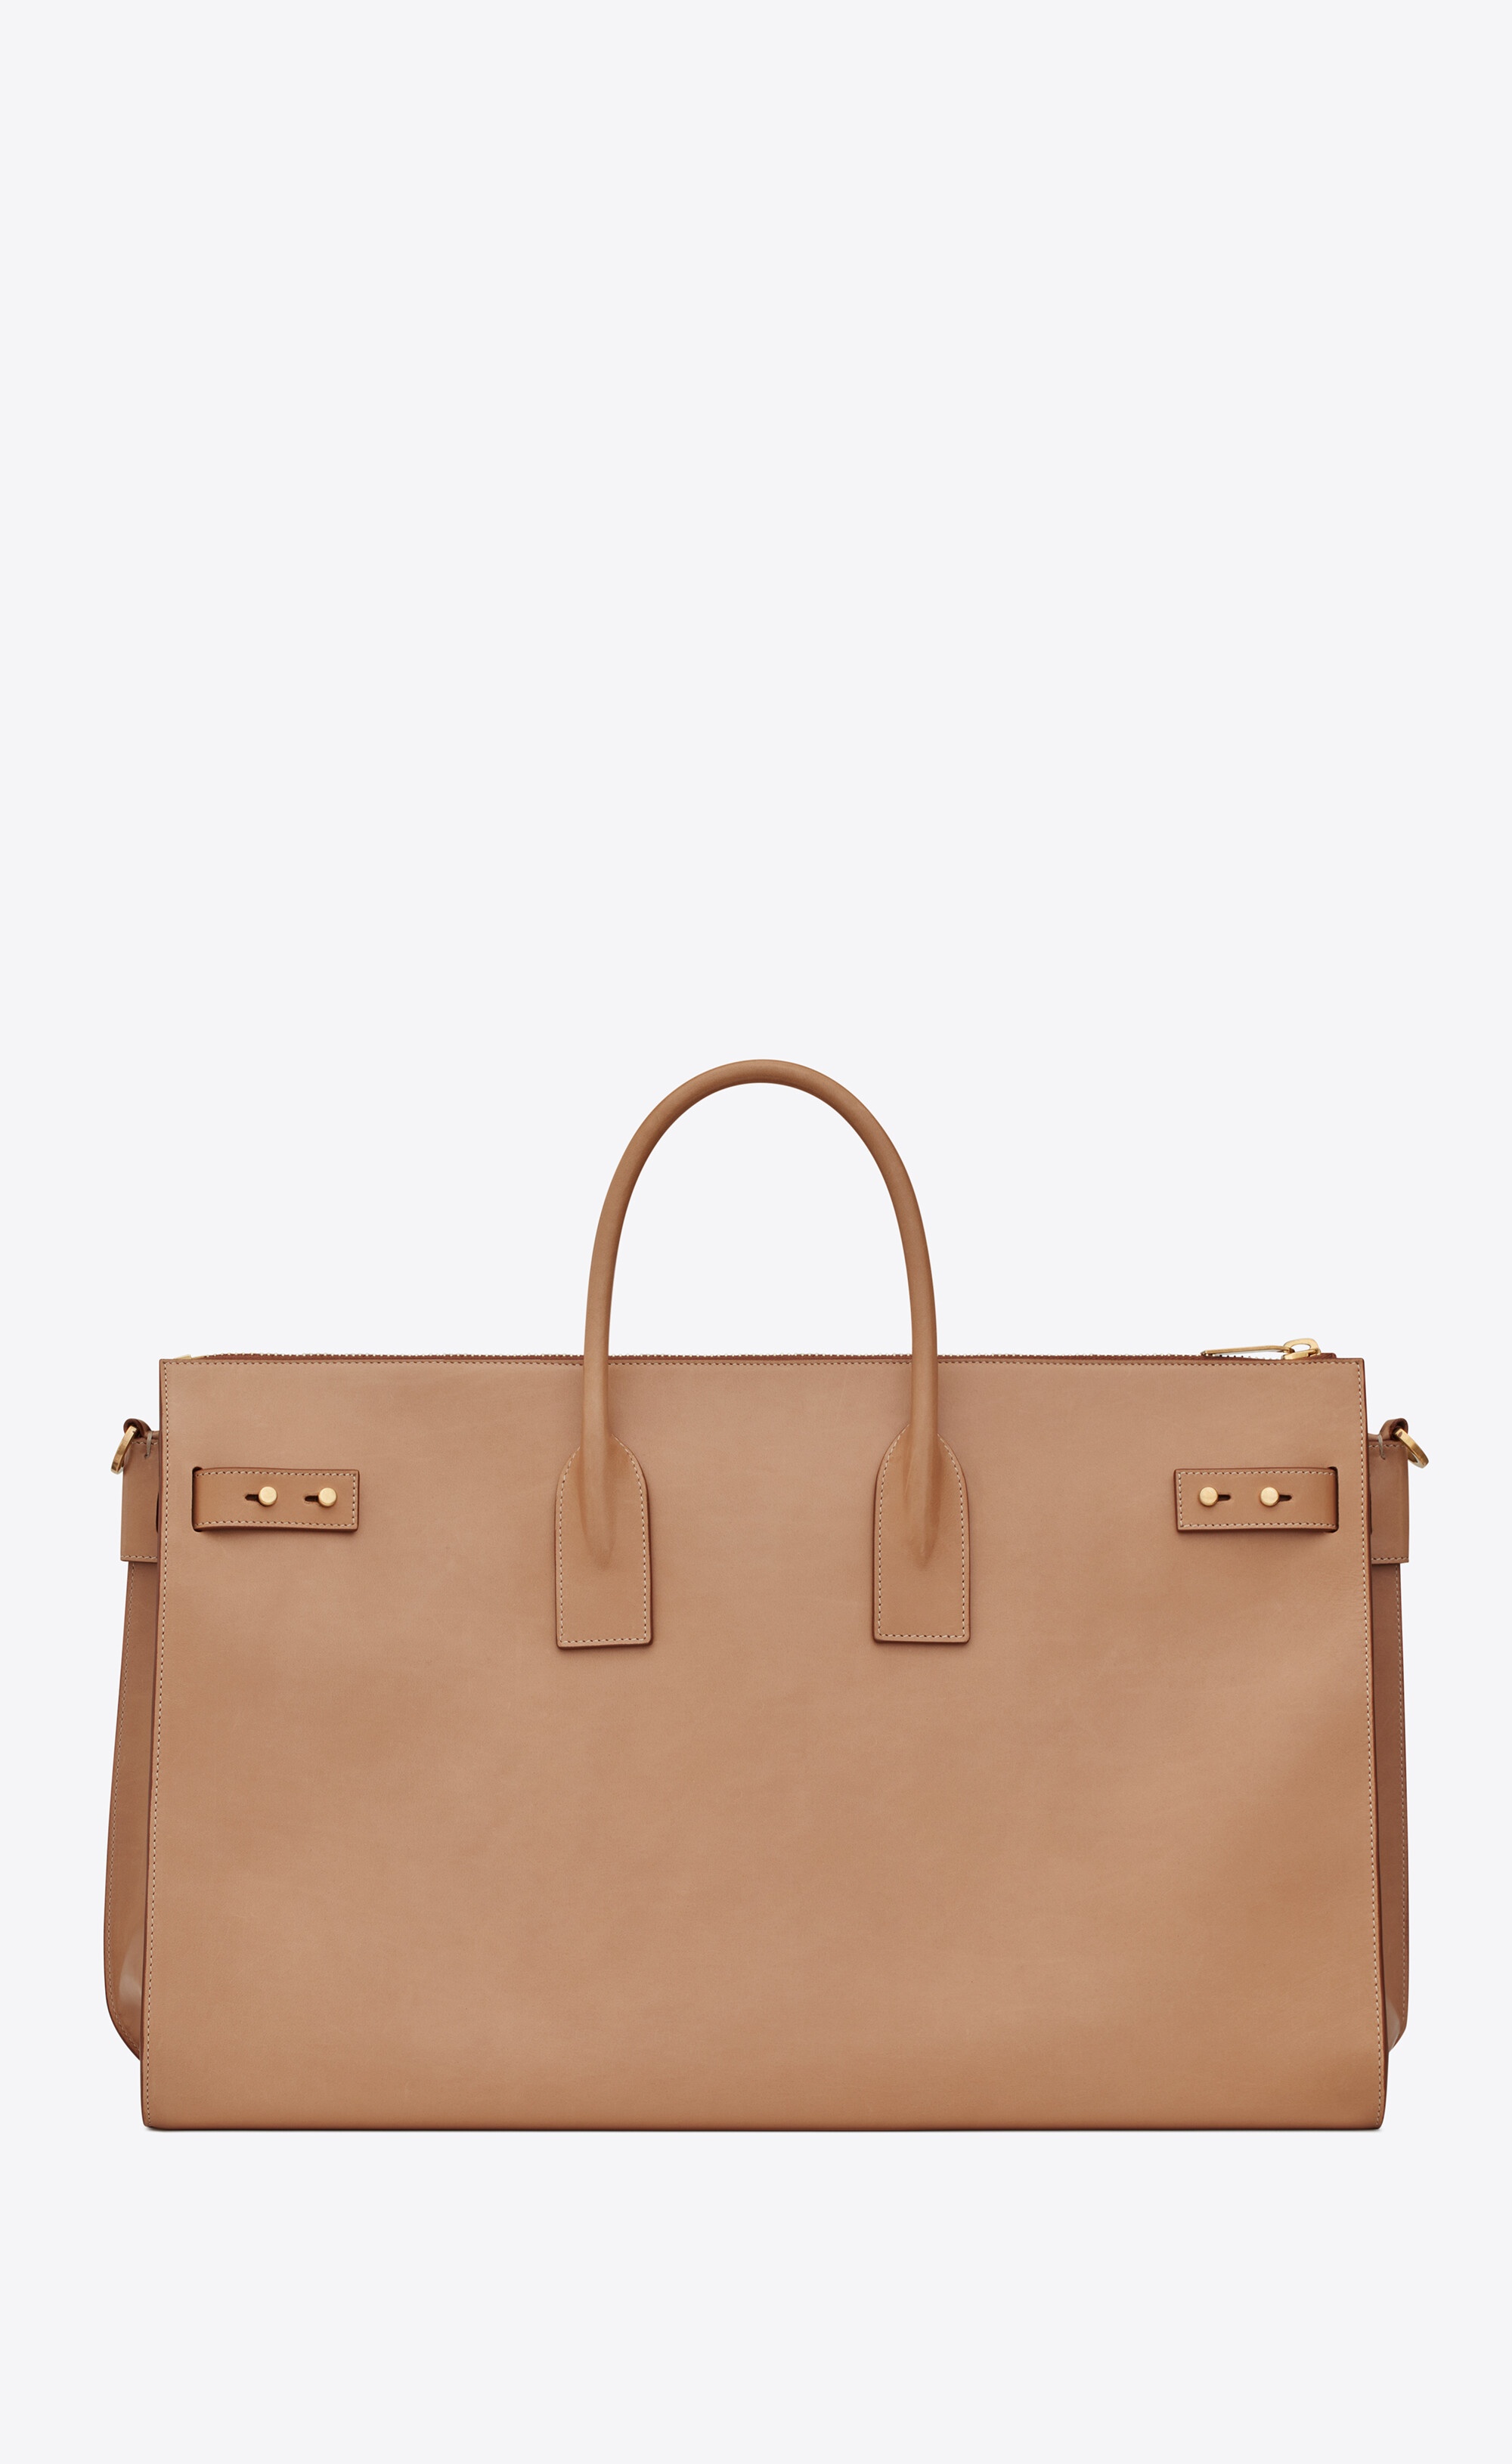 sac de jour 48h duffle bag in vintage vegetable-tanned leather - 2